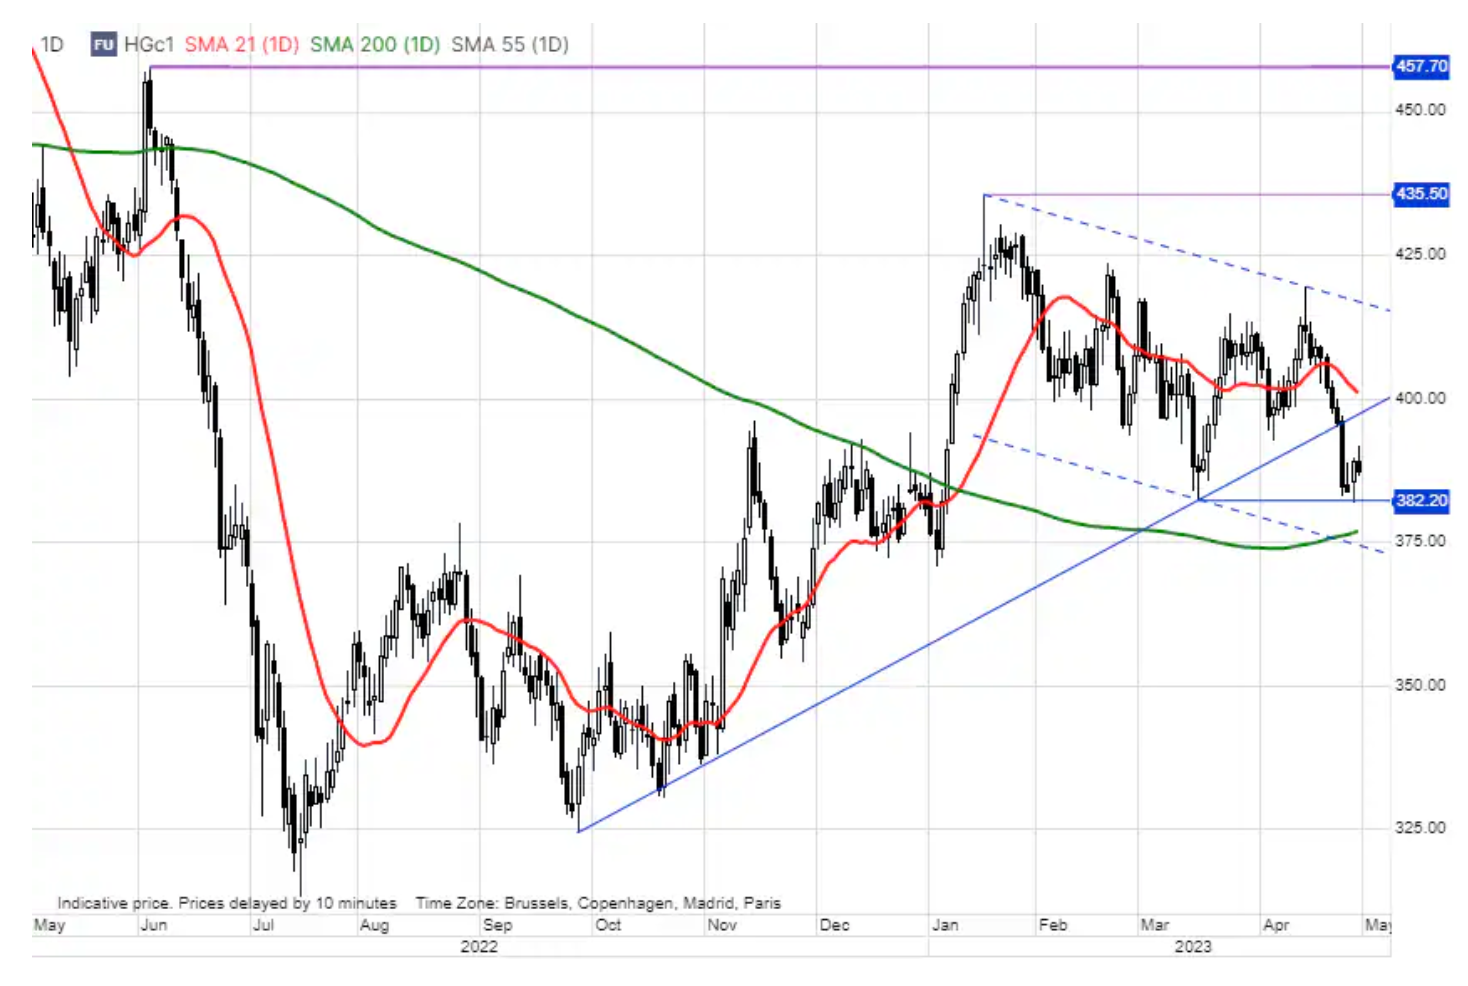 copper chart on May 2